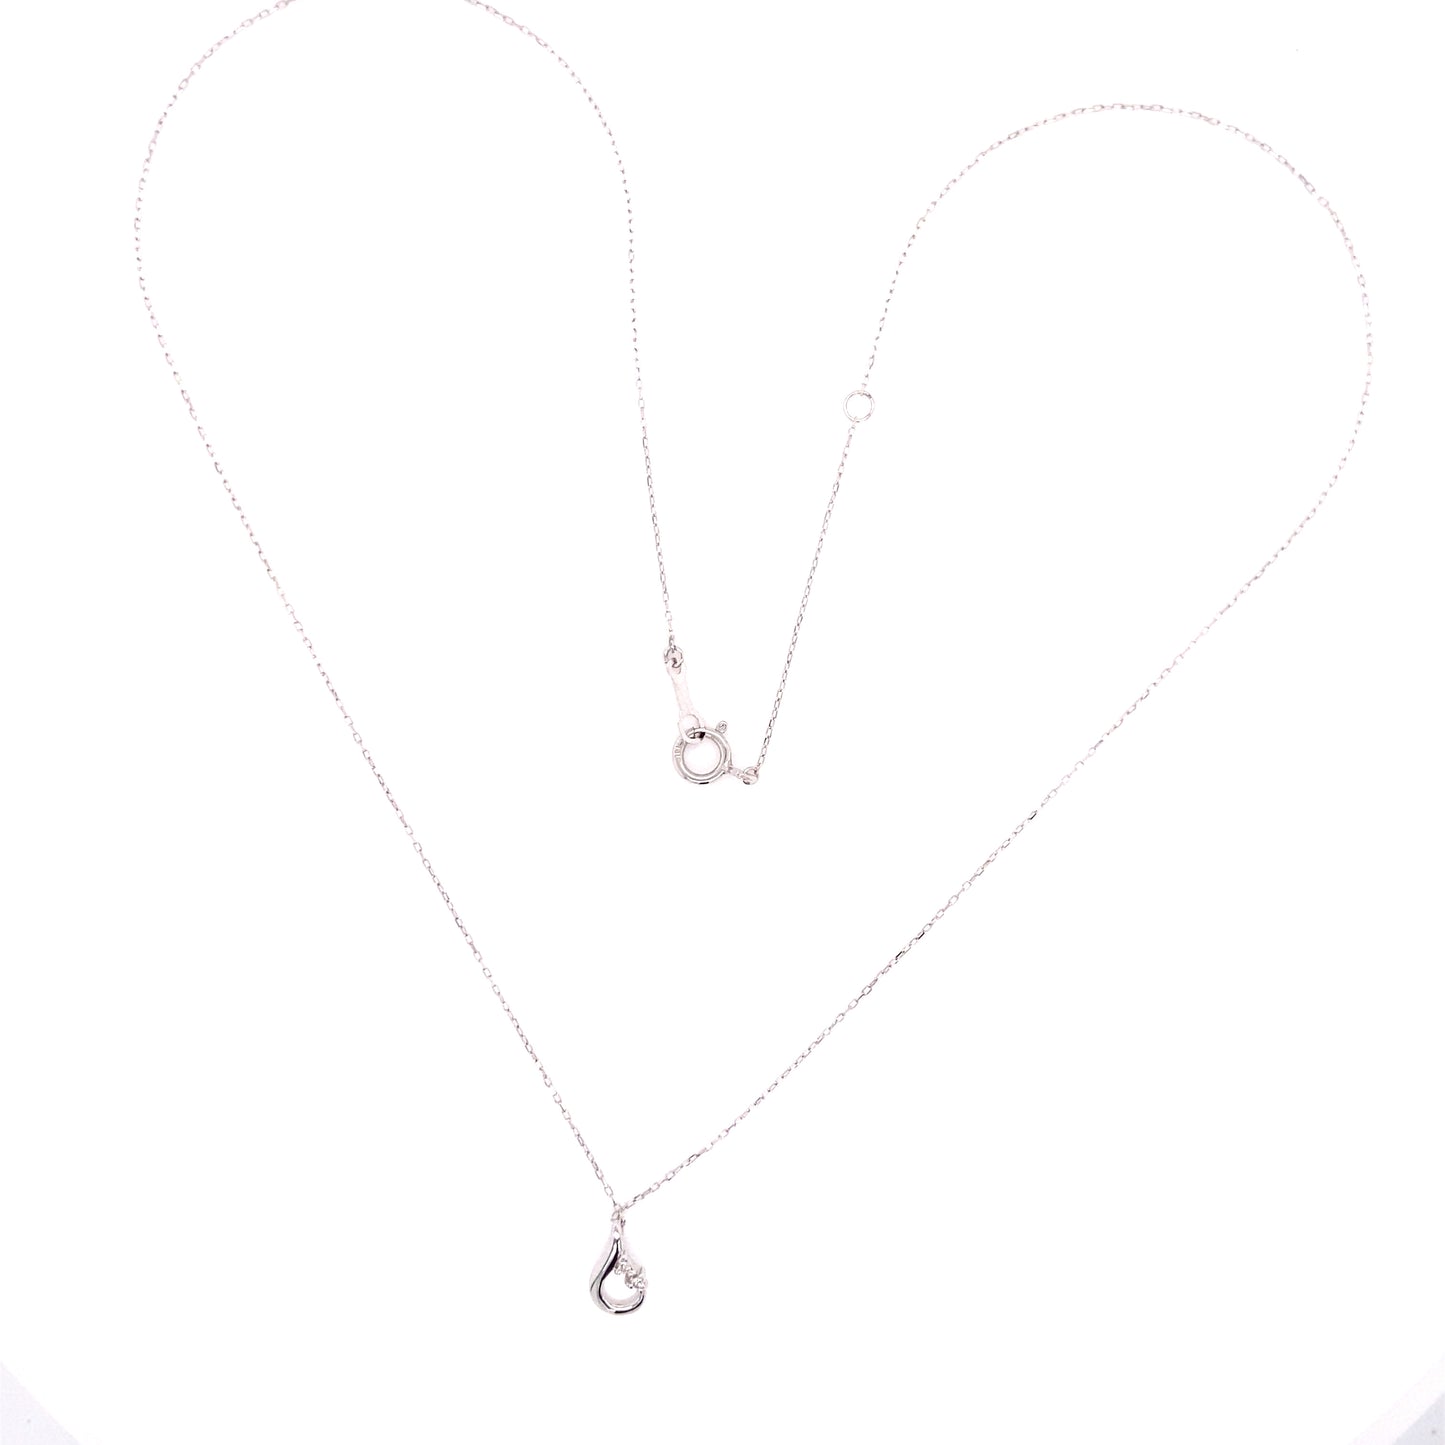 2 Dia Waterdrop Necklace 0.01ct